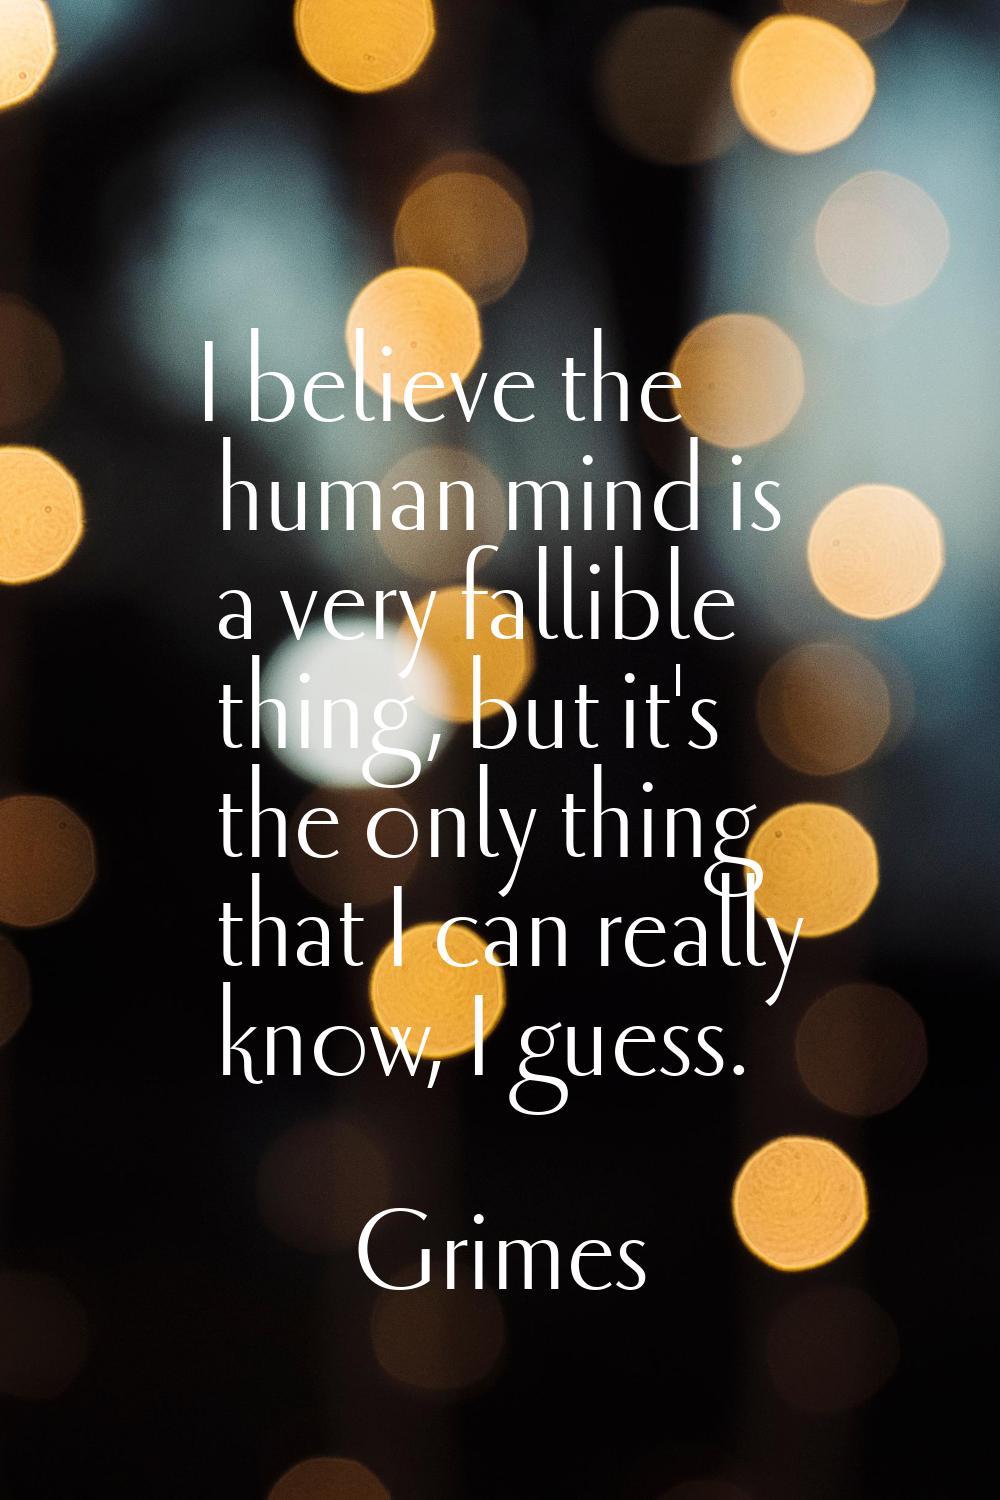 I believe the human mind is a very fallible thing, but it's the only thing that I can really know, 